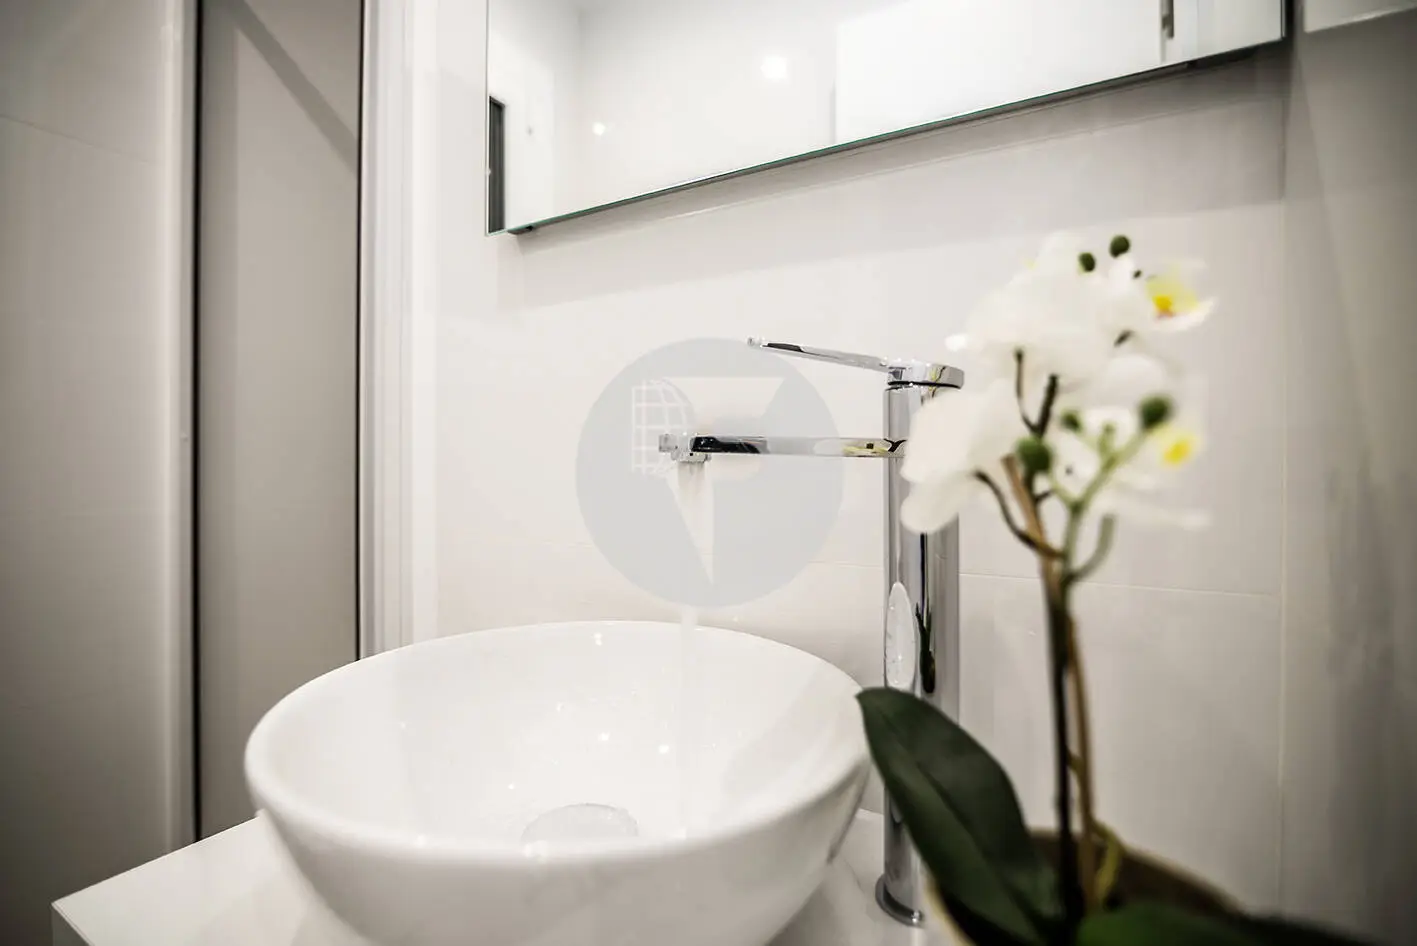 Brand new completely renovated apartment on Aragó street in the heart of El Clot in Barcelona. 29